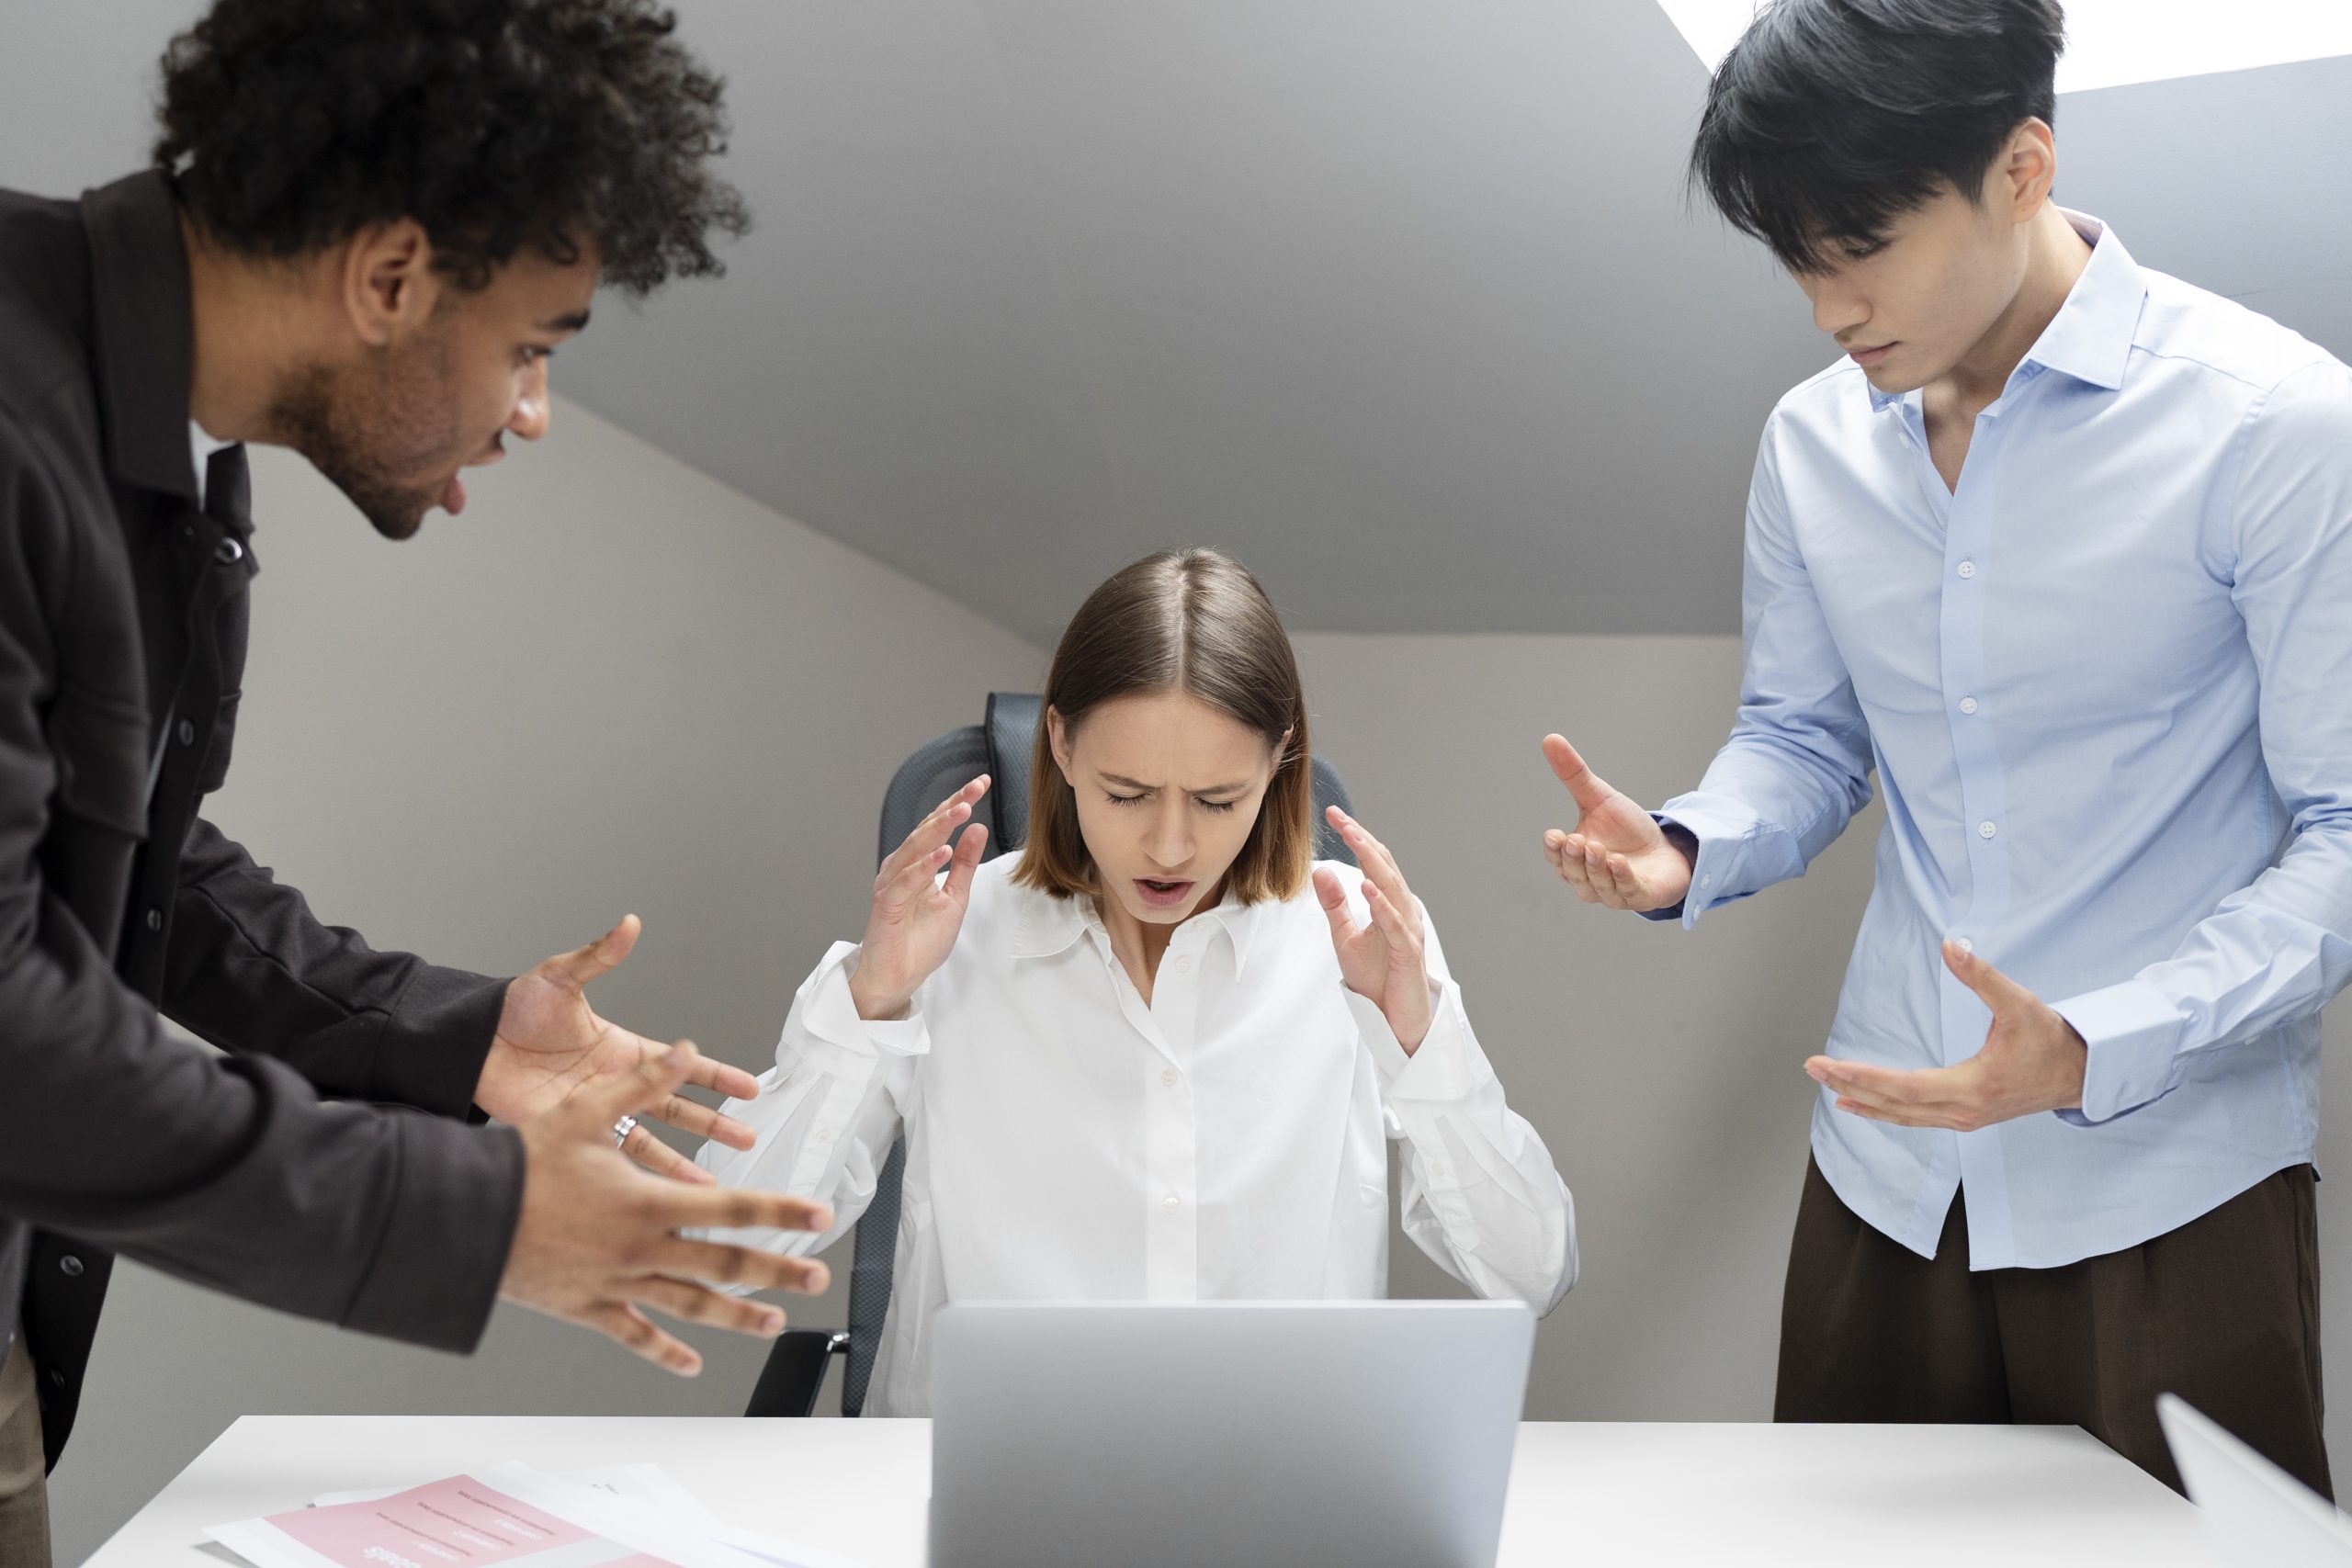 Colleagues Arguing in Toxic Workplace Culture